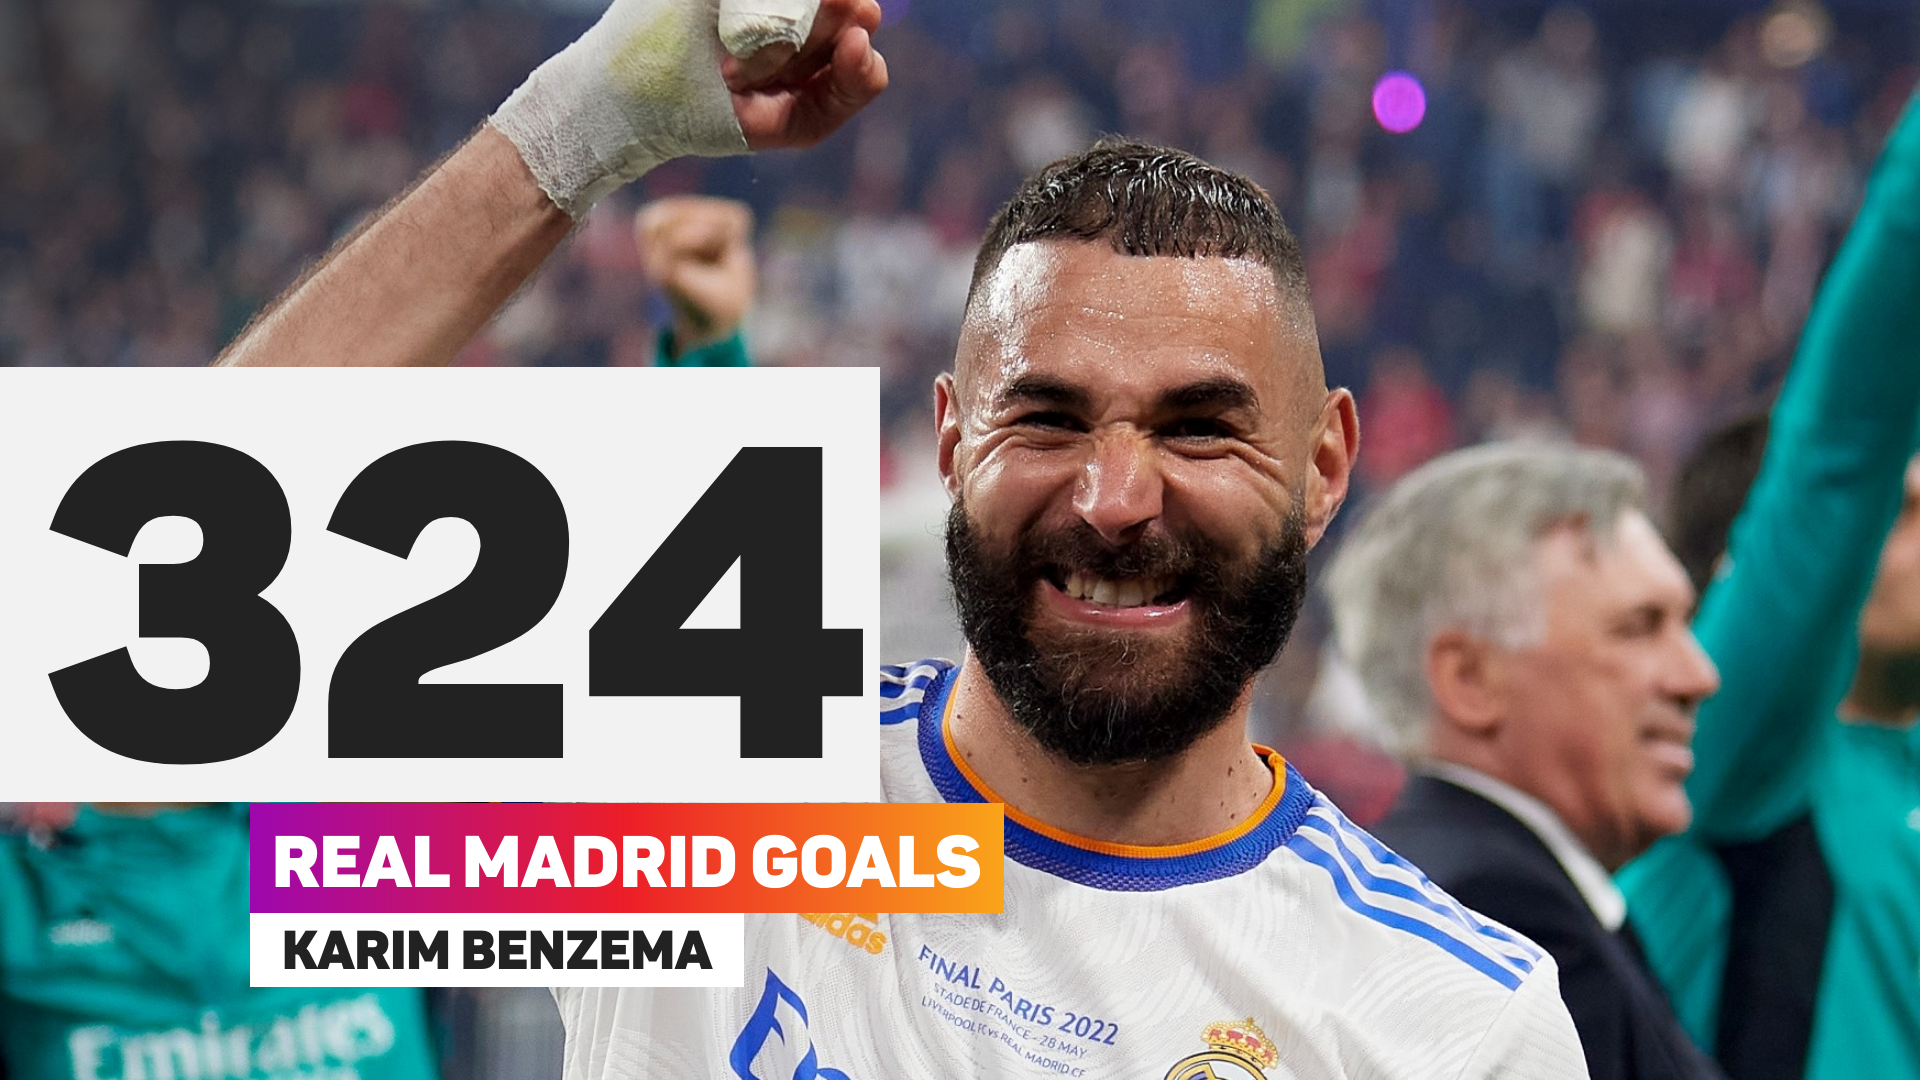 Karim Benzema is outright second in Real Madrid's scoring record books